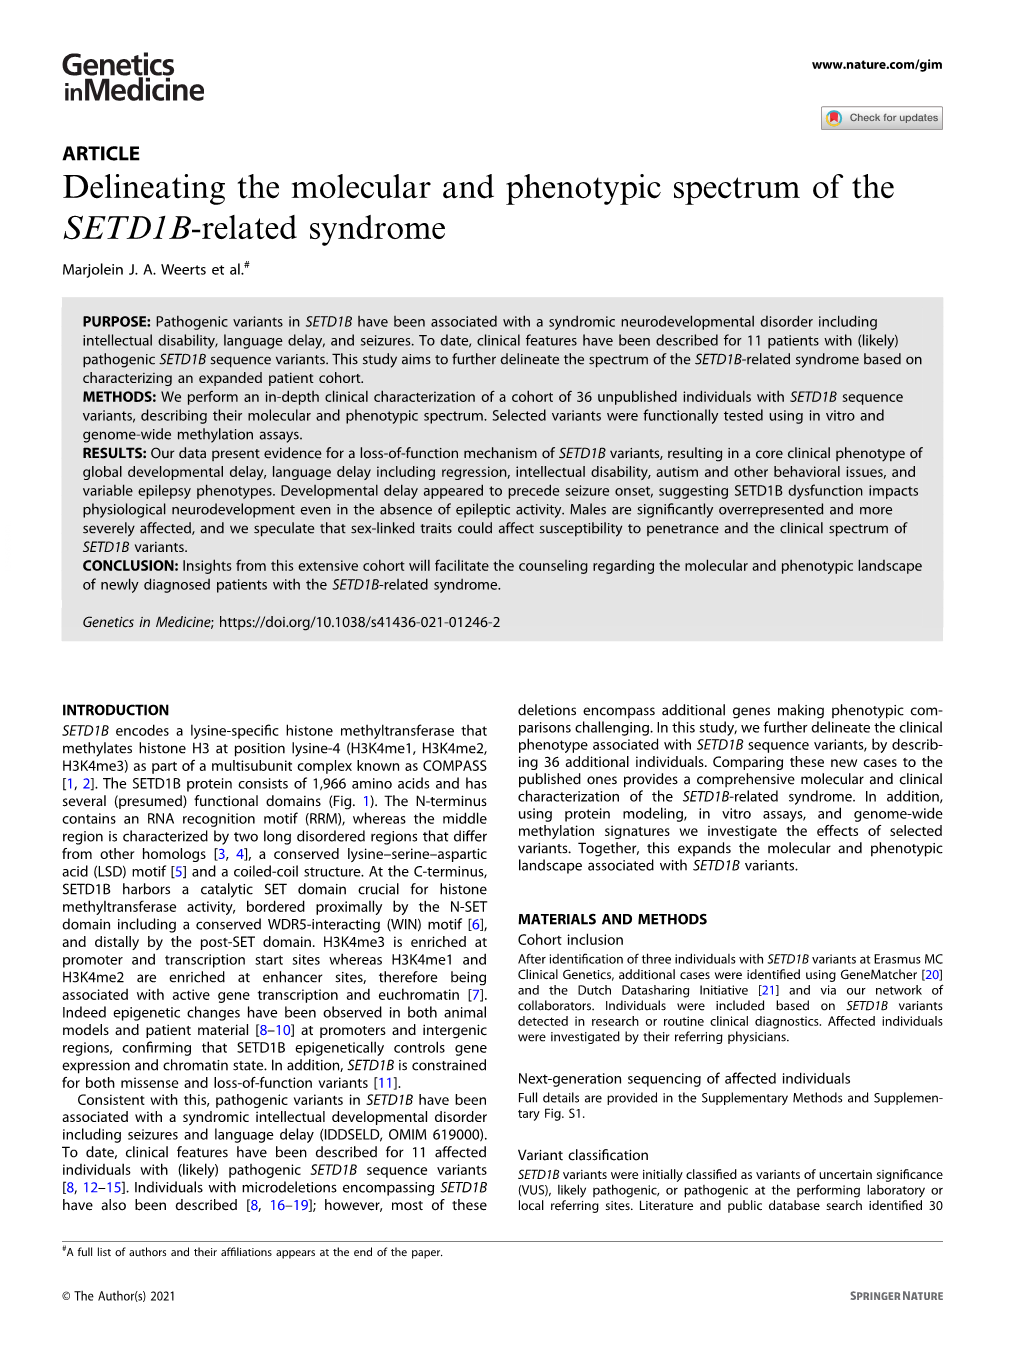 Delineating the Molecular and Phenotypic Spectrum of the SETD1B-Related Syndrome